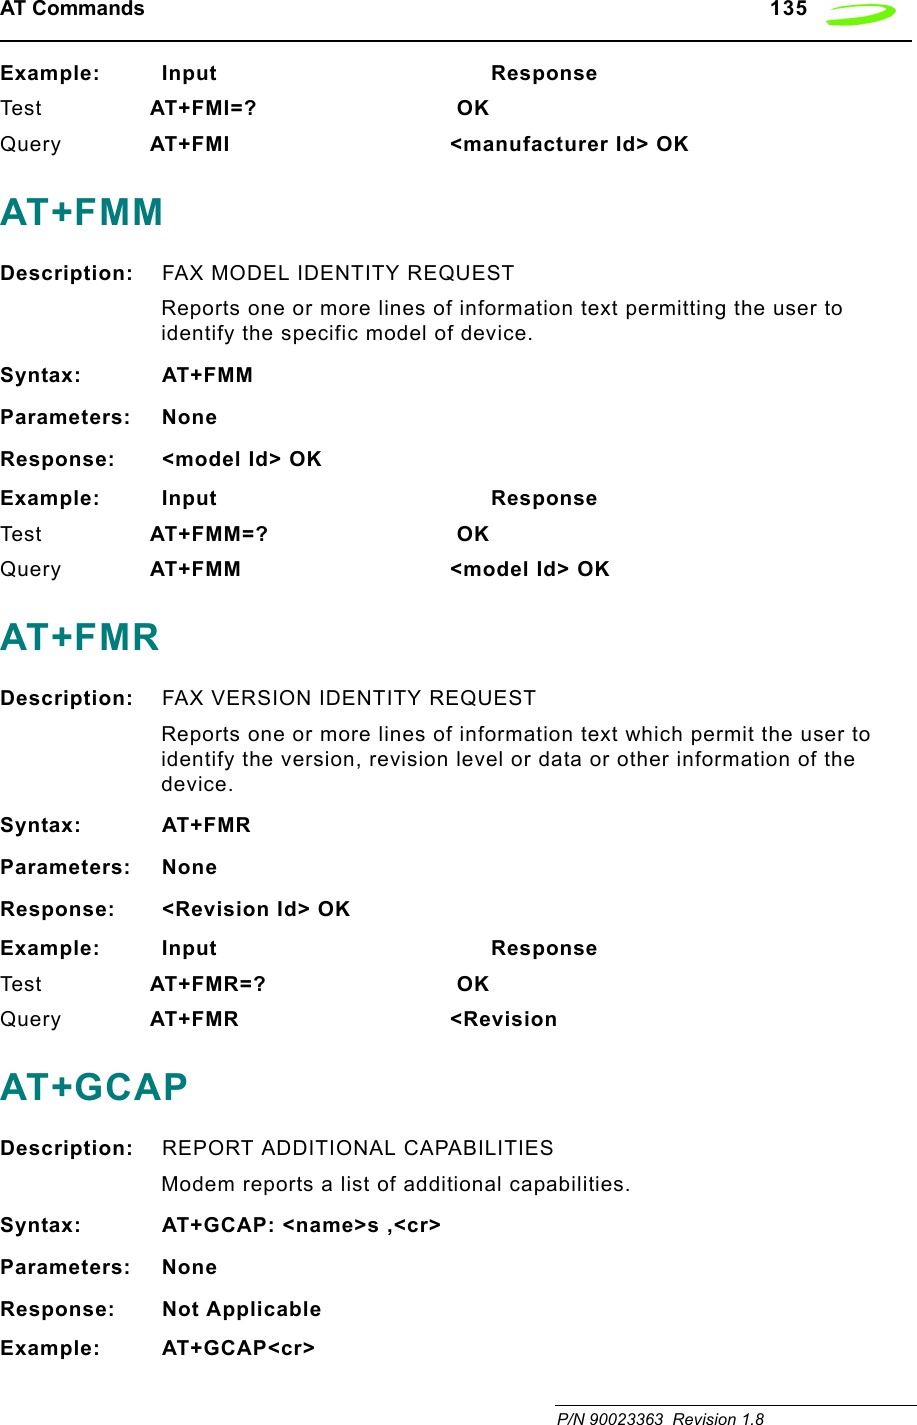 AT Commands   135 P/N 90023363  Revision 1.8 Example: Input                                       ResponseTes t AT+FMI=?  OKQuery AT+FMI &lt;manufacturer Id&gt; OKAT+FMMDescription: FAX MODEL IDENTITY REQUESTReports one or more lines of information text permitting the user to identify the specific model of device.Syntax: AT+FMMParameters: NoneResponse: &lt;model Id&gt; OKExample: Input                                       ResponseTes t AT+FMM=?  OKQuery AT+FMM &lt;model Id&gt; OKAT+FMRDescription: FAX VERSION IDENTITY REQUESTReports one or more lines of information text which permit the user to identify the version, revision level or data or other information of the device.Syntax: AT+FMRParameters: NoneResponse: &lt;Revision Id&gt; OKExample: Input                                       ResponseTes t AT+FMR=?  OKQuery AT+FMR &lt;RevisionAT+GCAPDescription: REPORT ADDITIONAL CAPABILITIESModem reports a list of additional capabilities.Syntax: AT+GCAP: &lt;name&gt;s ,&lt;cr&gt;Parameters: NoneResponse: Not ApplicableExample: AT+GCAP&lt;cr&gt;